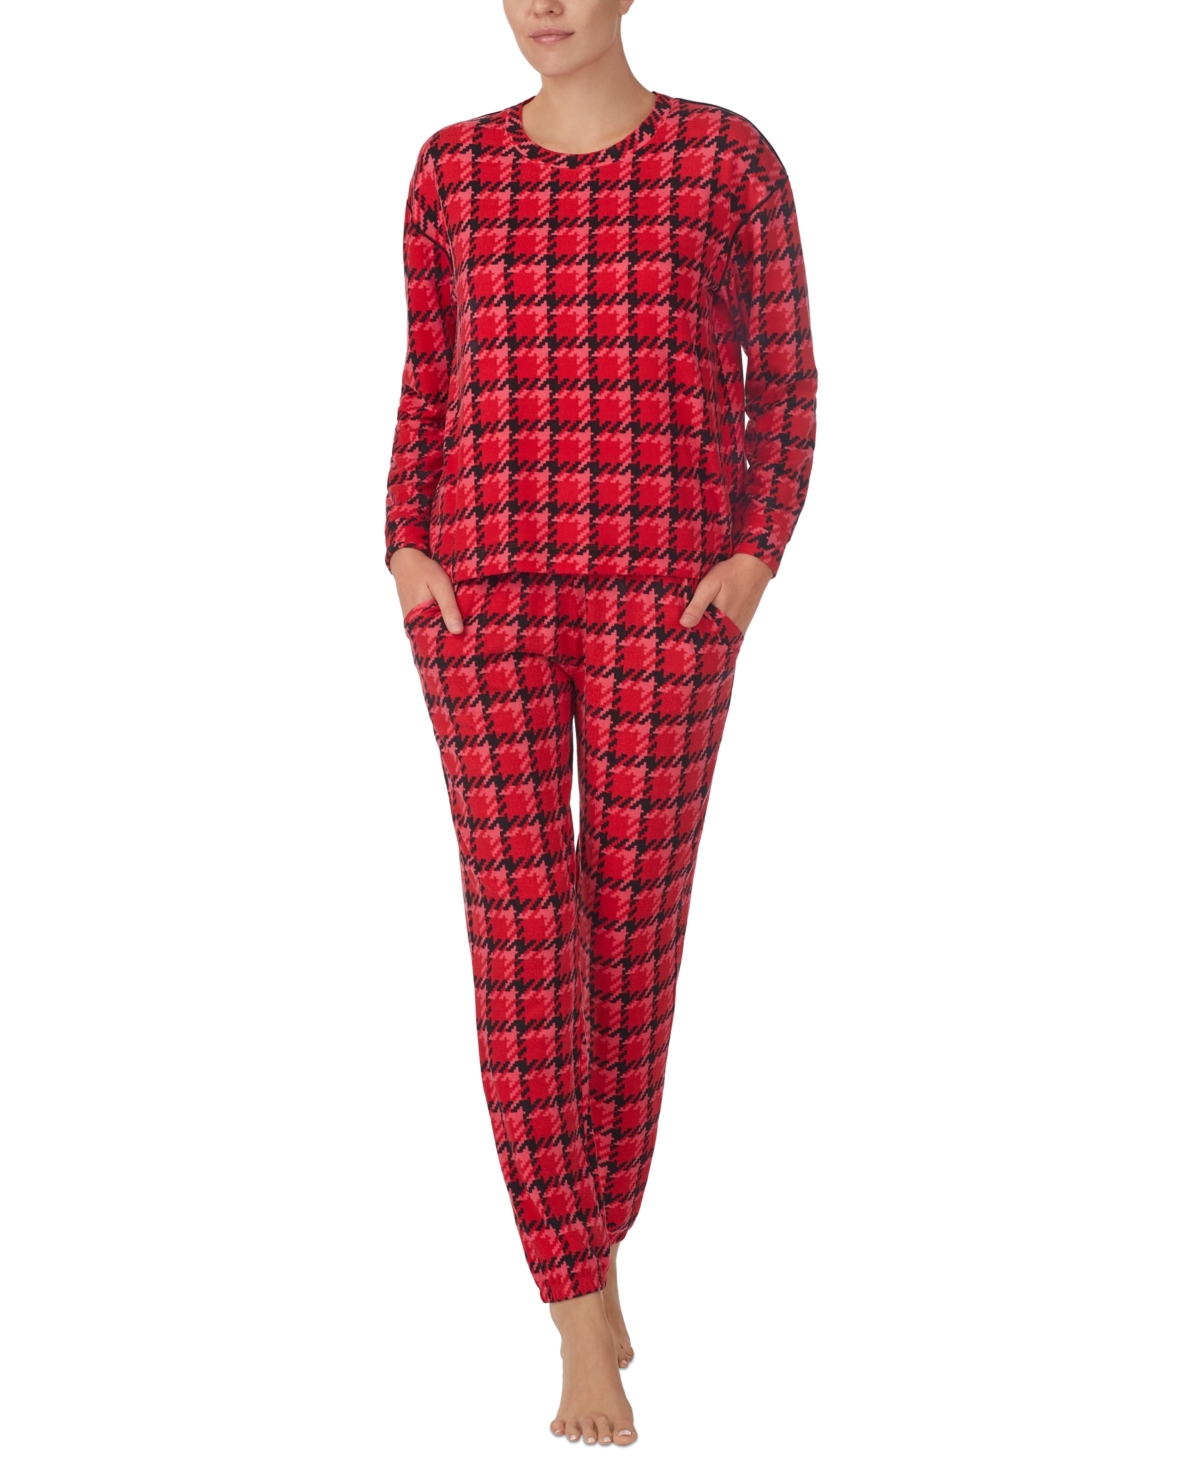 Sanctuary Woman's 2-pc. Long-sleeve Jogger Pajamas Set In Red Check